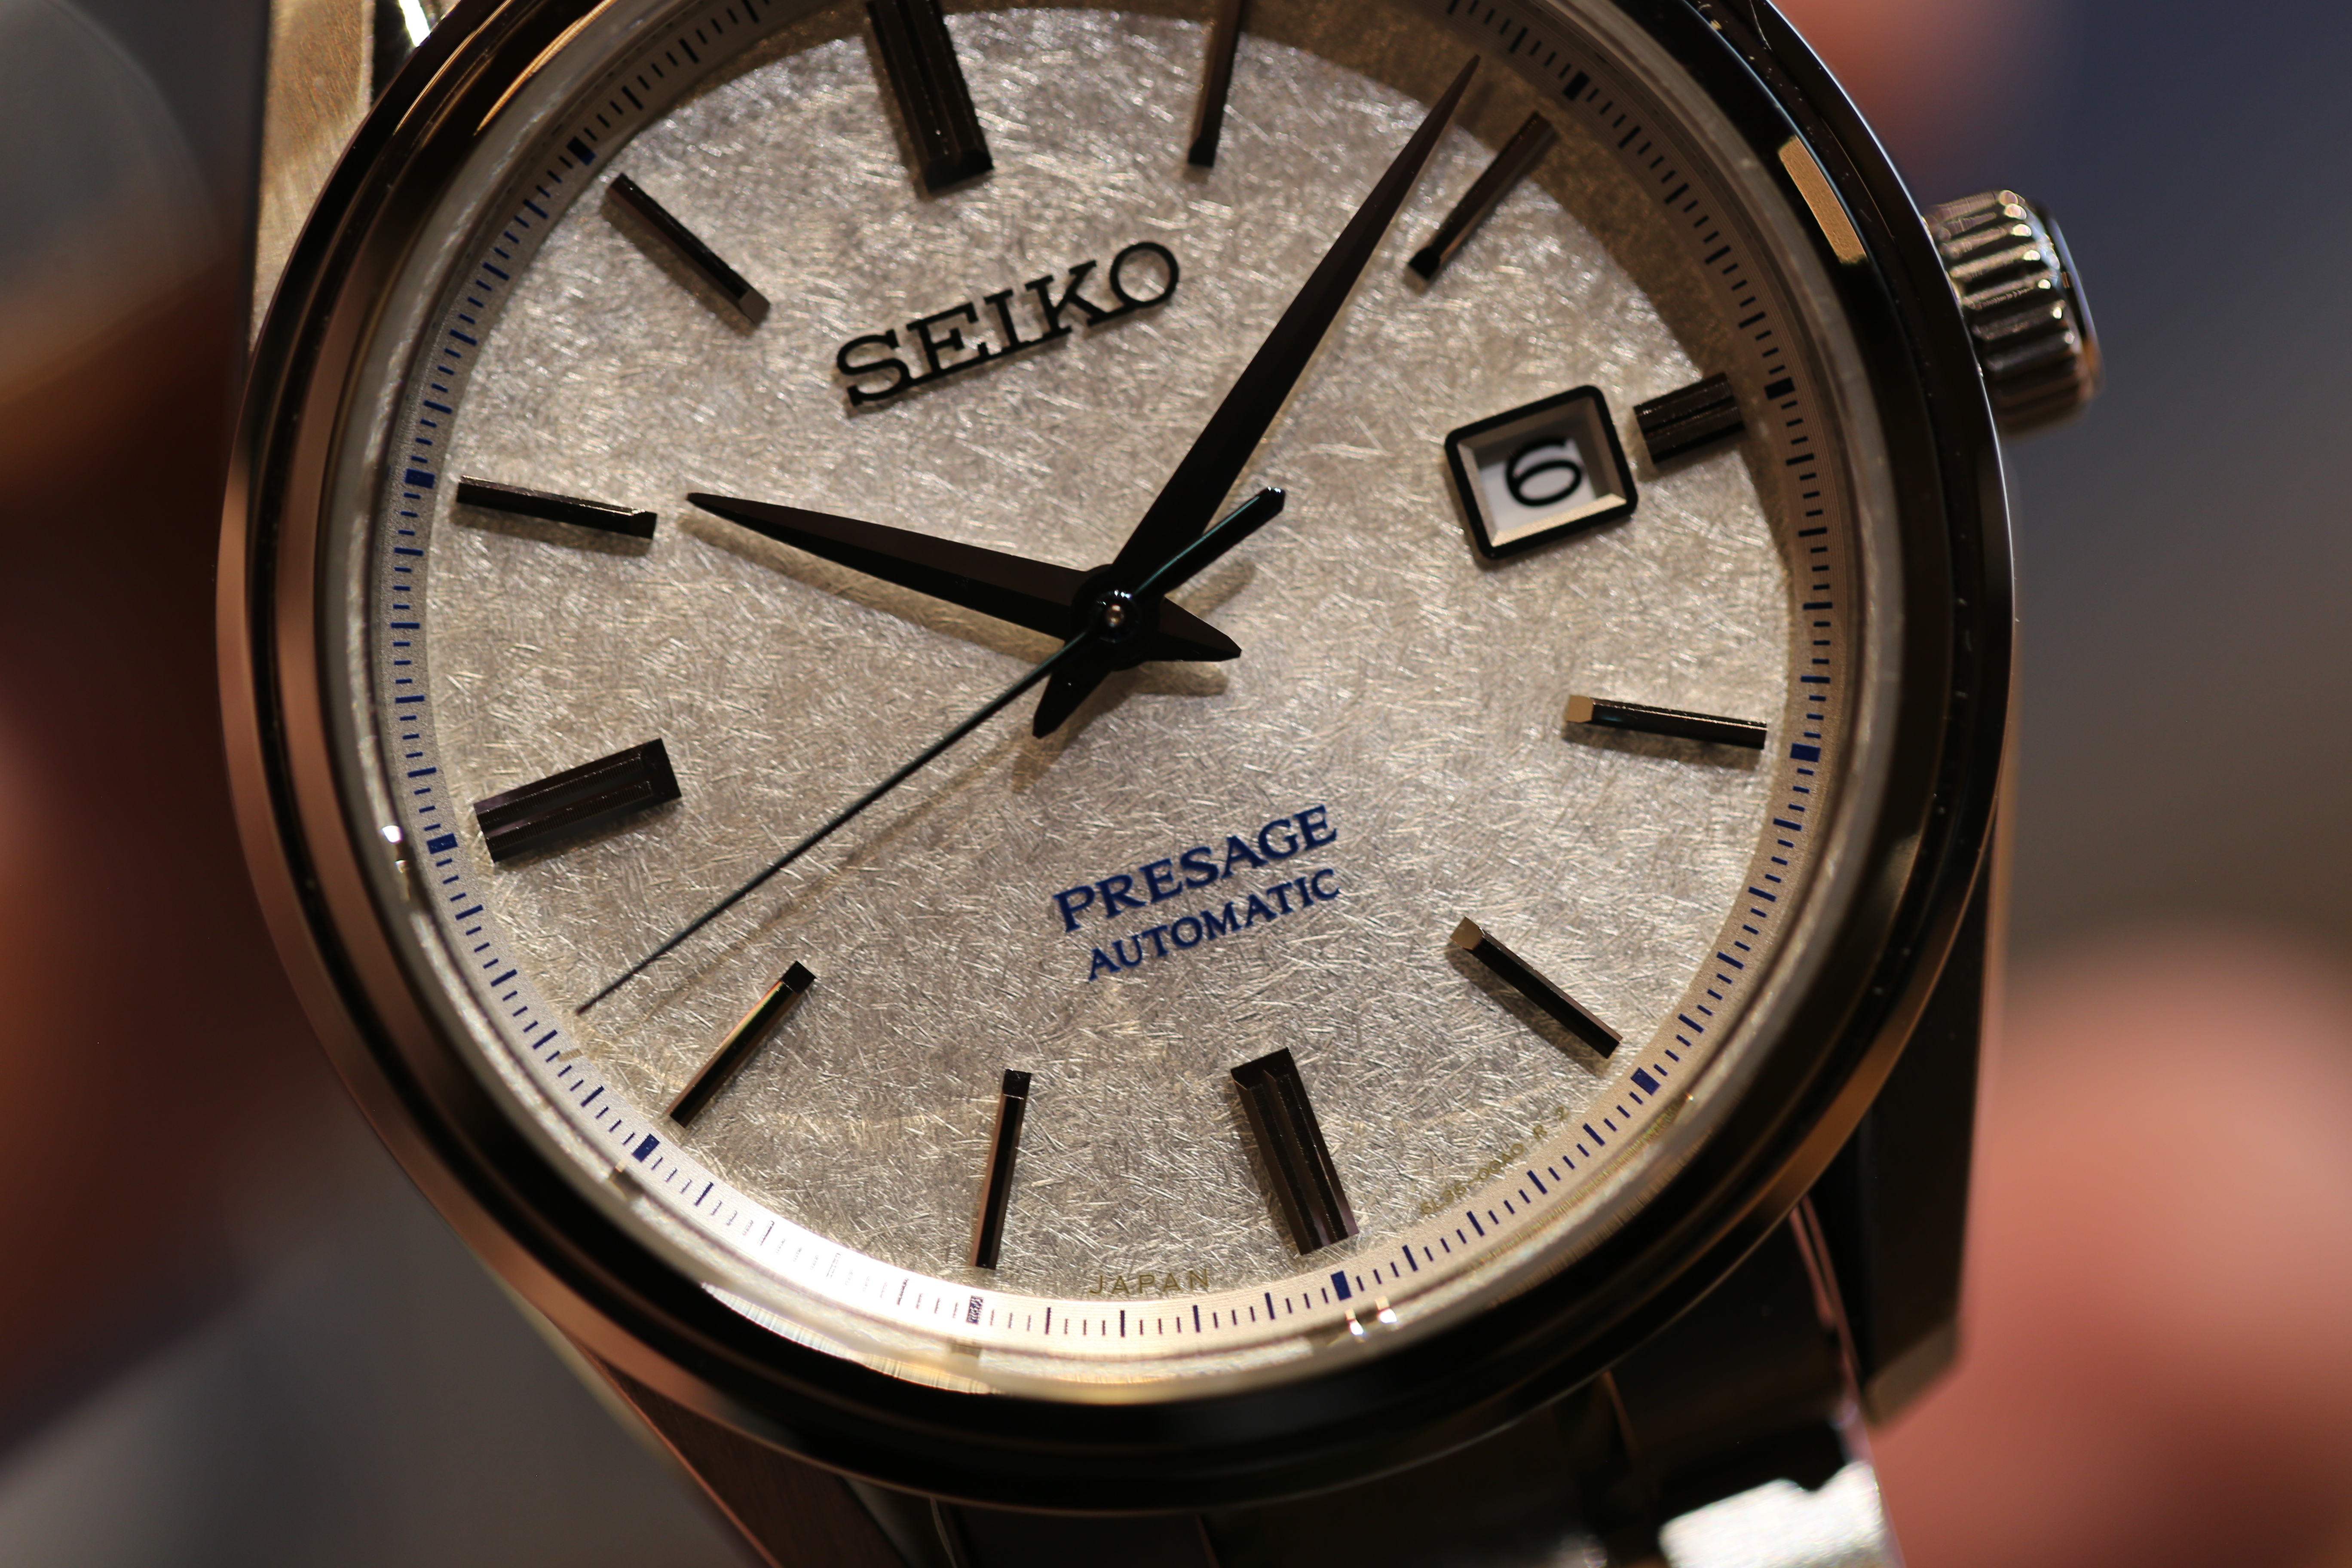 prins Nedrustning Hospital Introducing the New Seiko Presage and Prospex Models | WatchTime - USA's  No.1 Watch Magazine